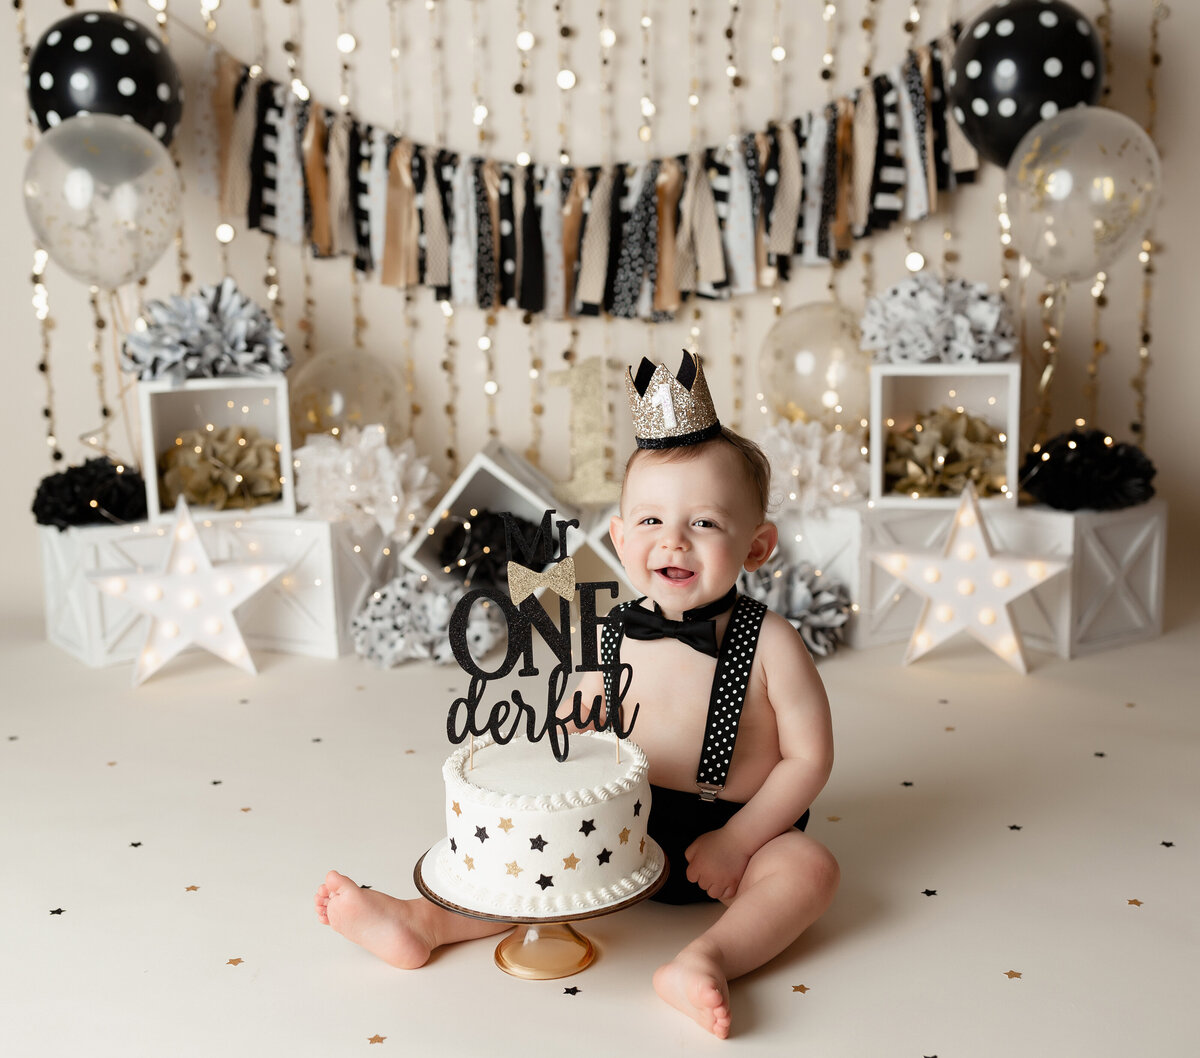 Black, white and gold cake smash at West Palm Beach and Wellington newborn and cake smash photographer. Baby boy in black shorts, black and white polkadot suspenders, and gold party crown sitting in front of a white cake with black and gold stars. In the background a gold white and black pennant, gold wall hangings, balloons, and white stars.